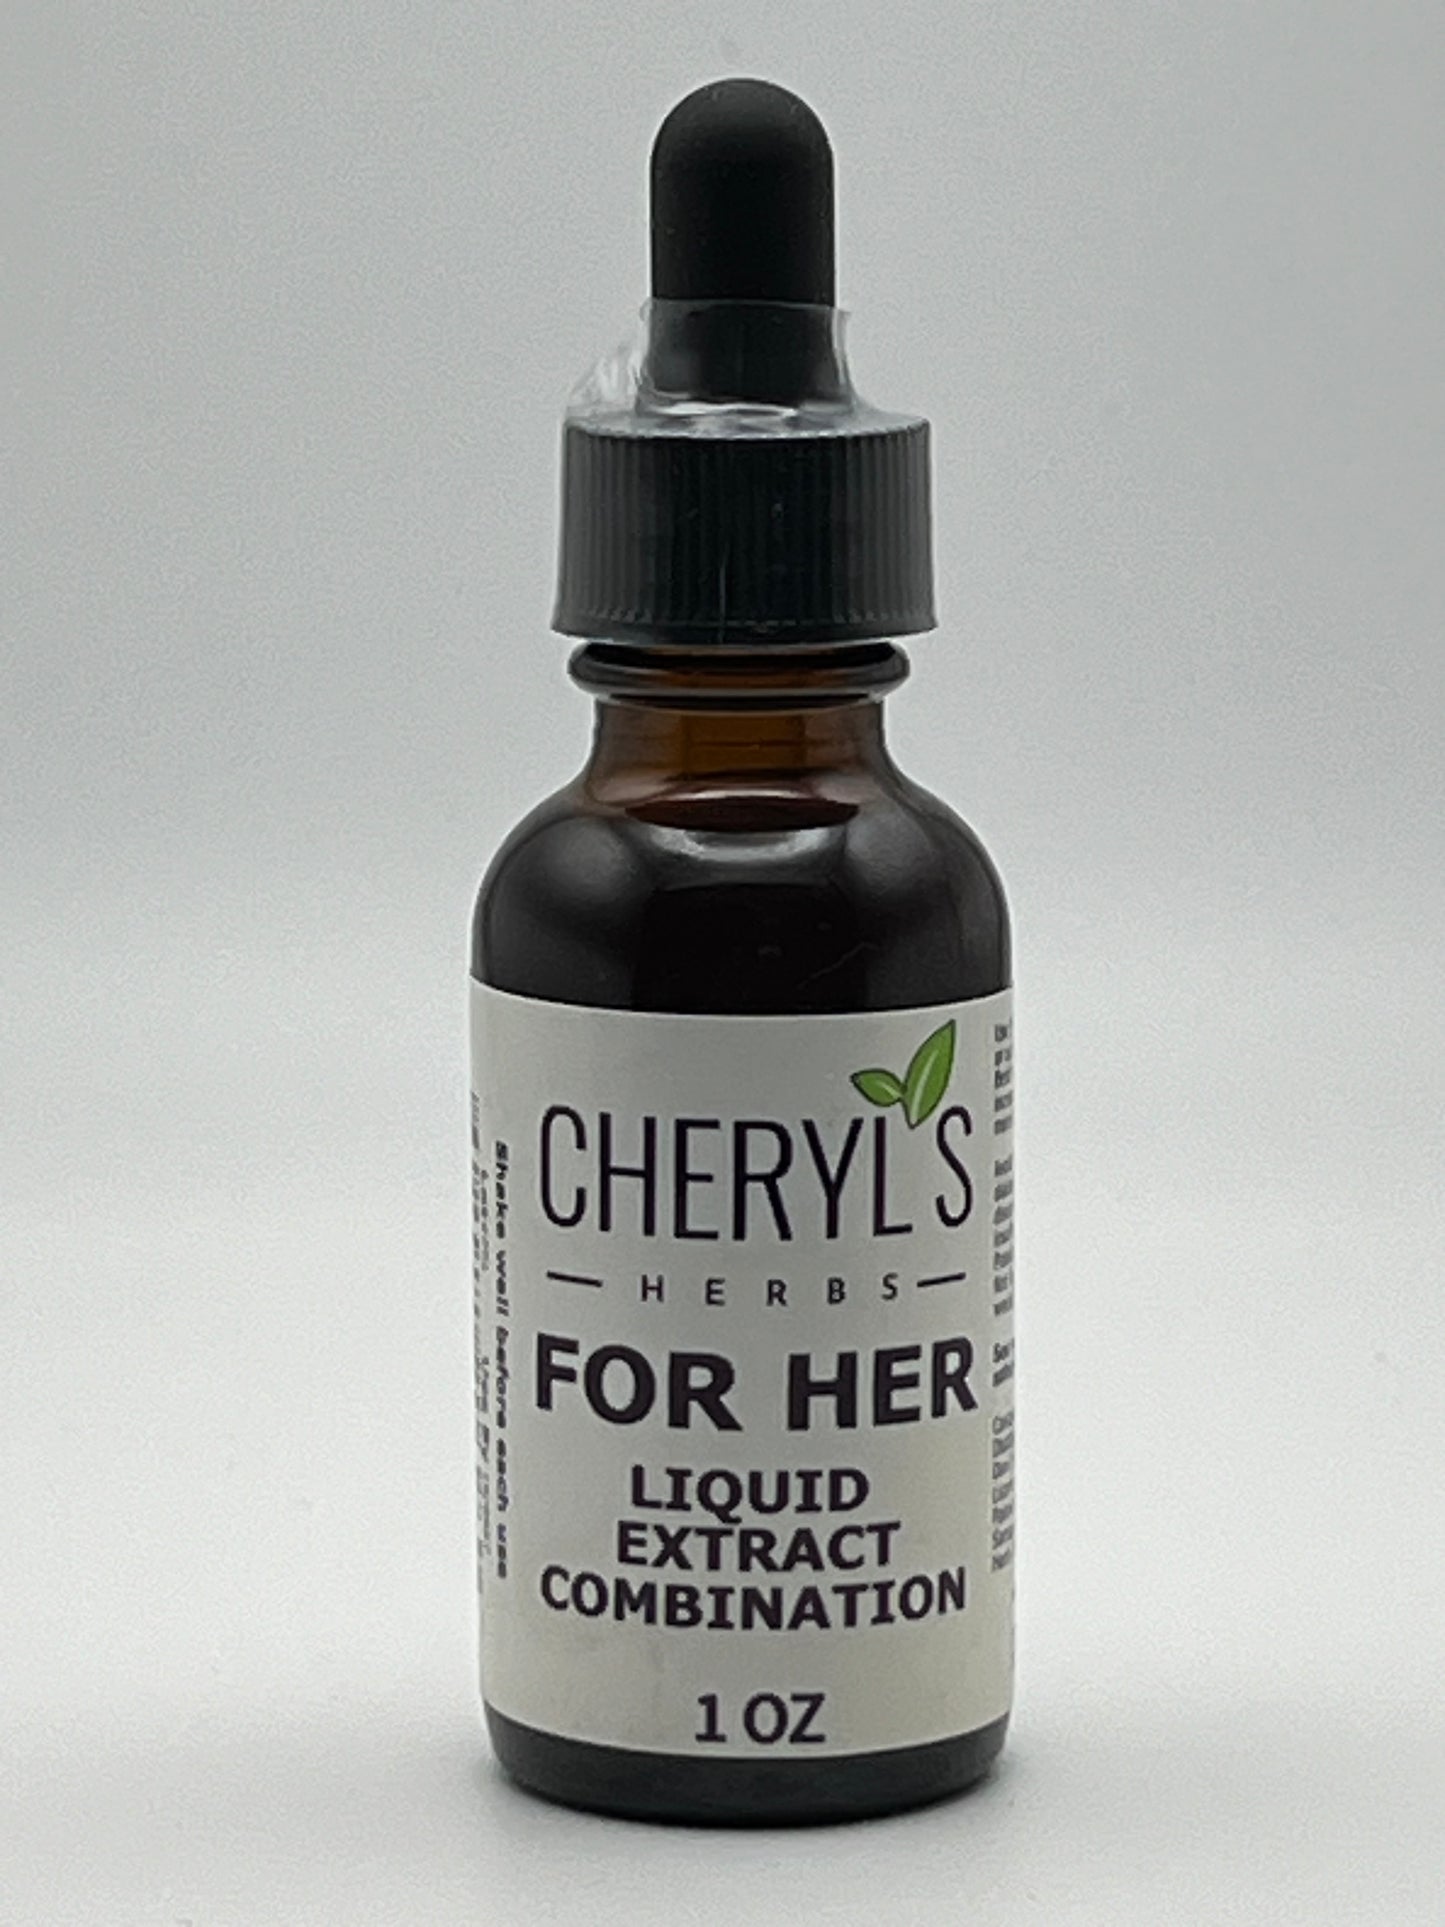 Cheryls Herbs For Her Liquid Extract Combination- Support for Menopause